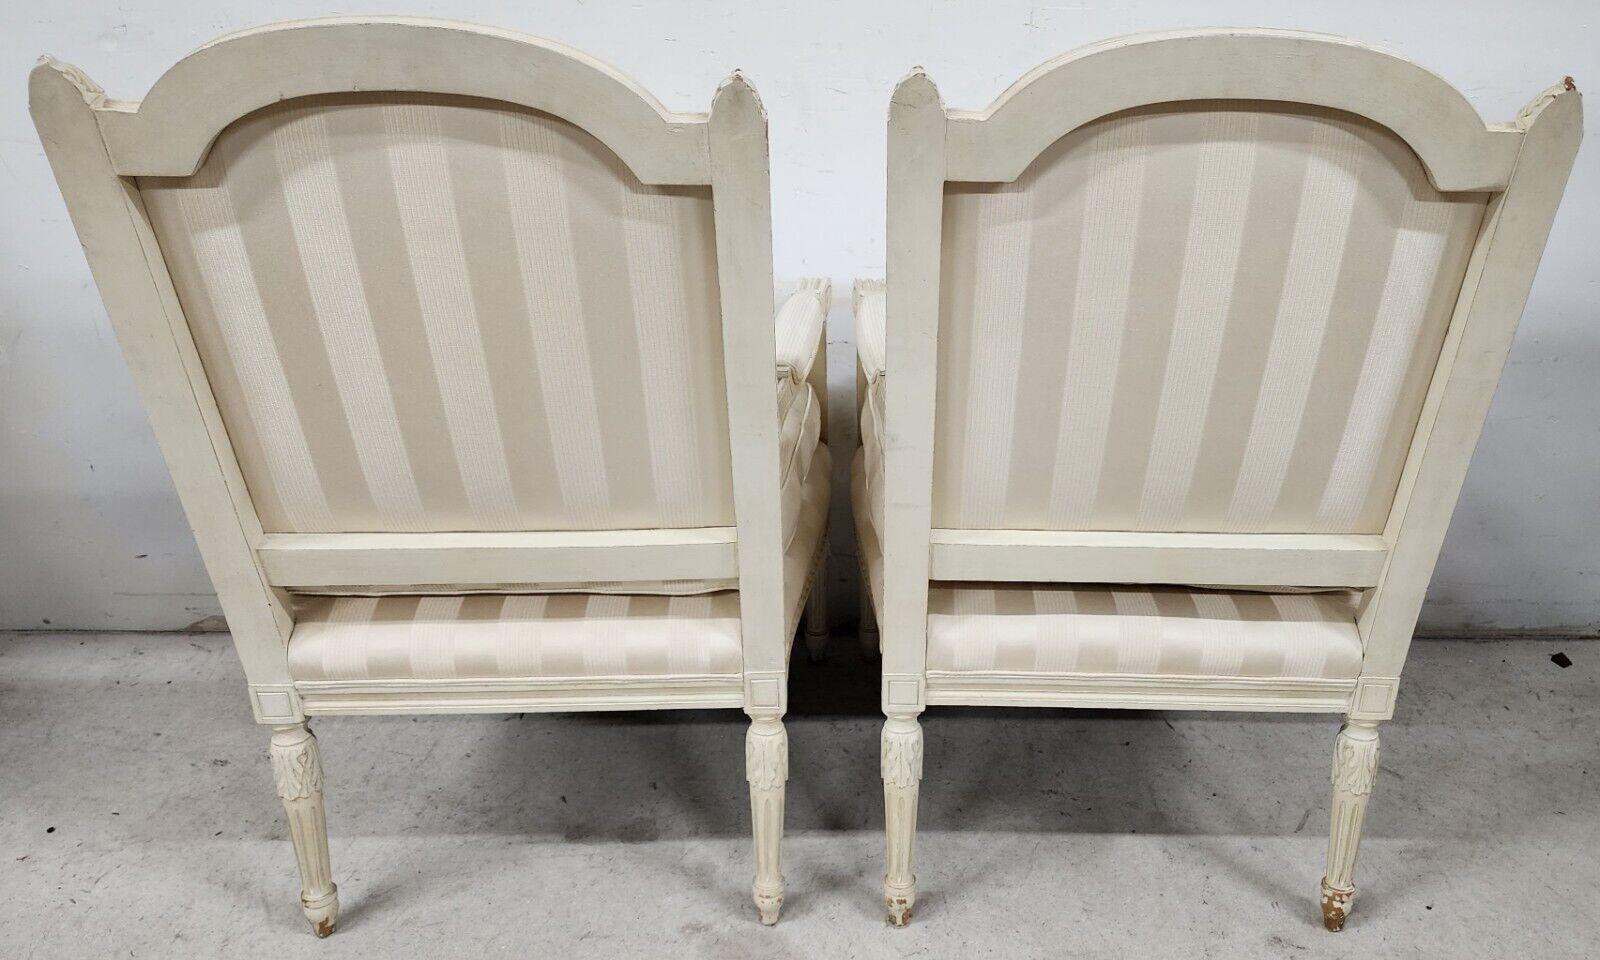 Offering one of our recent Palm Beach estate fine furniture acquisitions of a
Pair of vintage french style Shabby Chic distressed armchairs
Cushions are very comfortable and soft and they bounce back when you get up.

Approximate measurements in